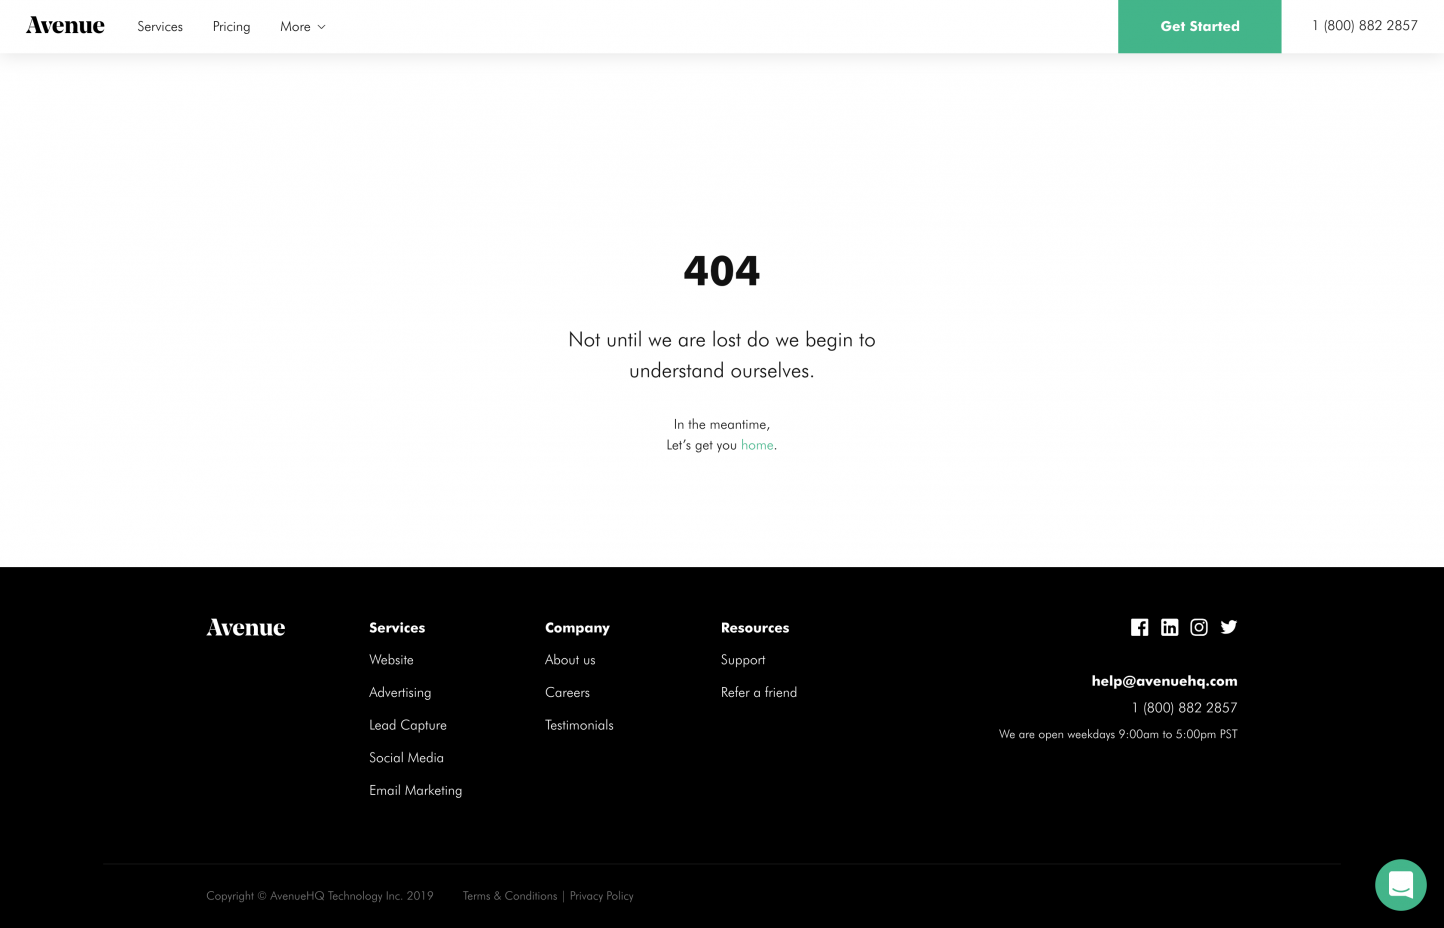 Screenshot of the 404 page from the Avenue website.